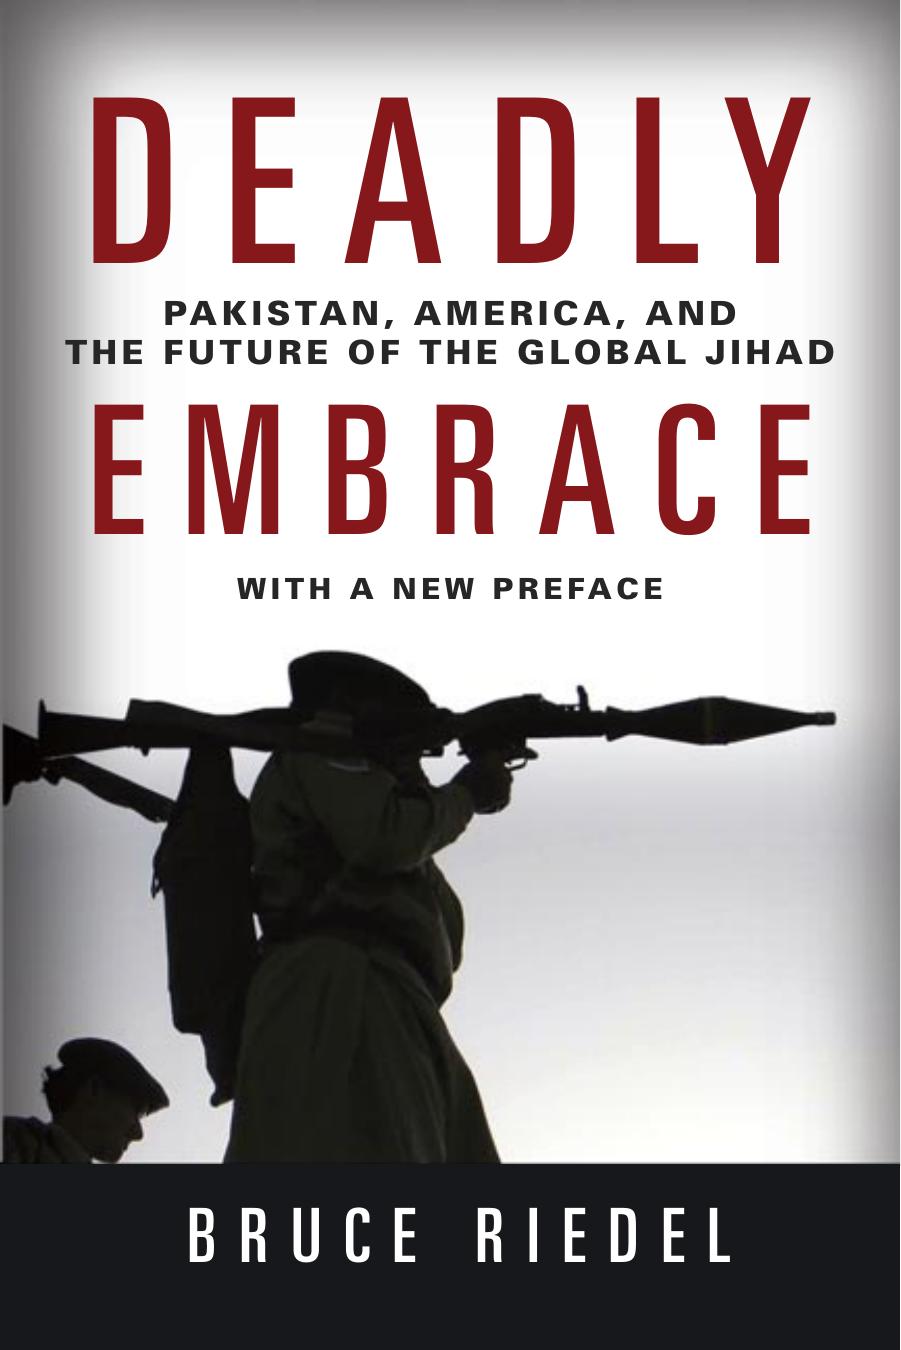 Deadly Embrace: Pakistan, America, and The Future of the Global Jihad by Bruce Riedel